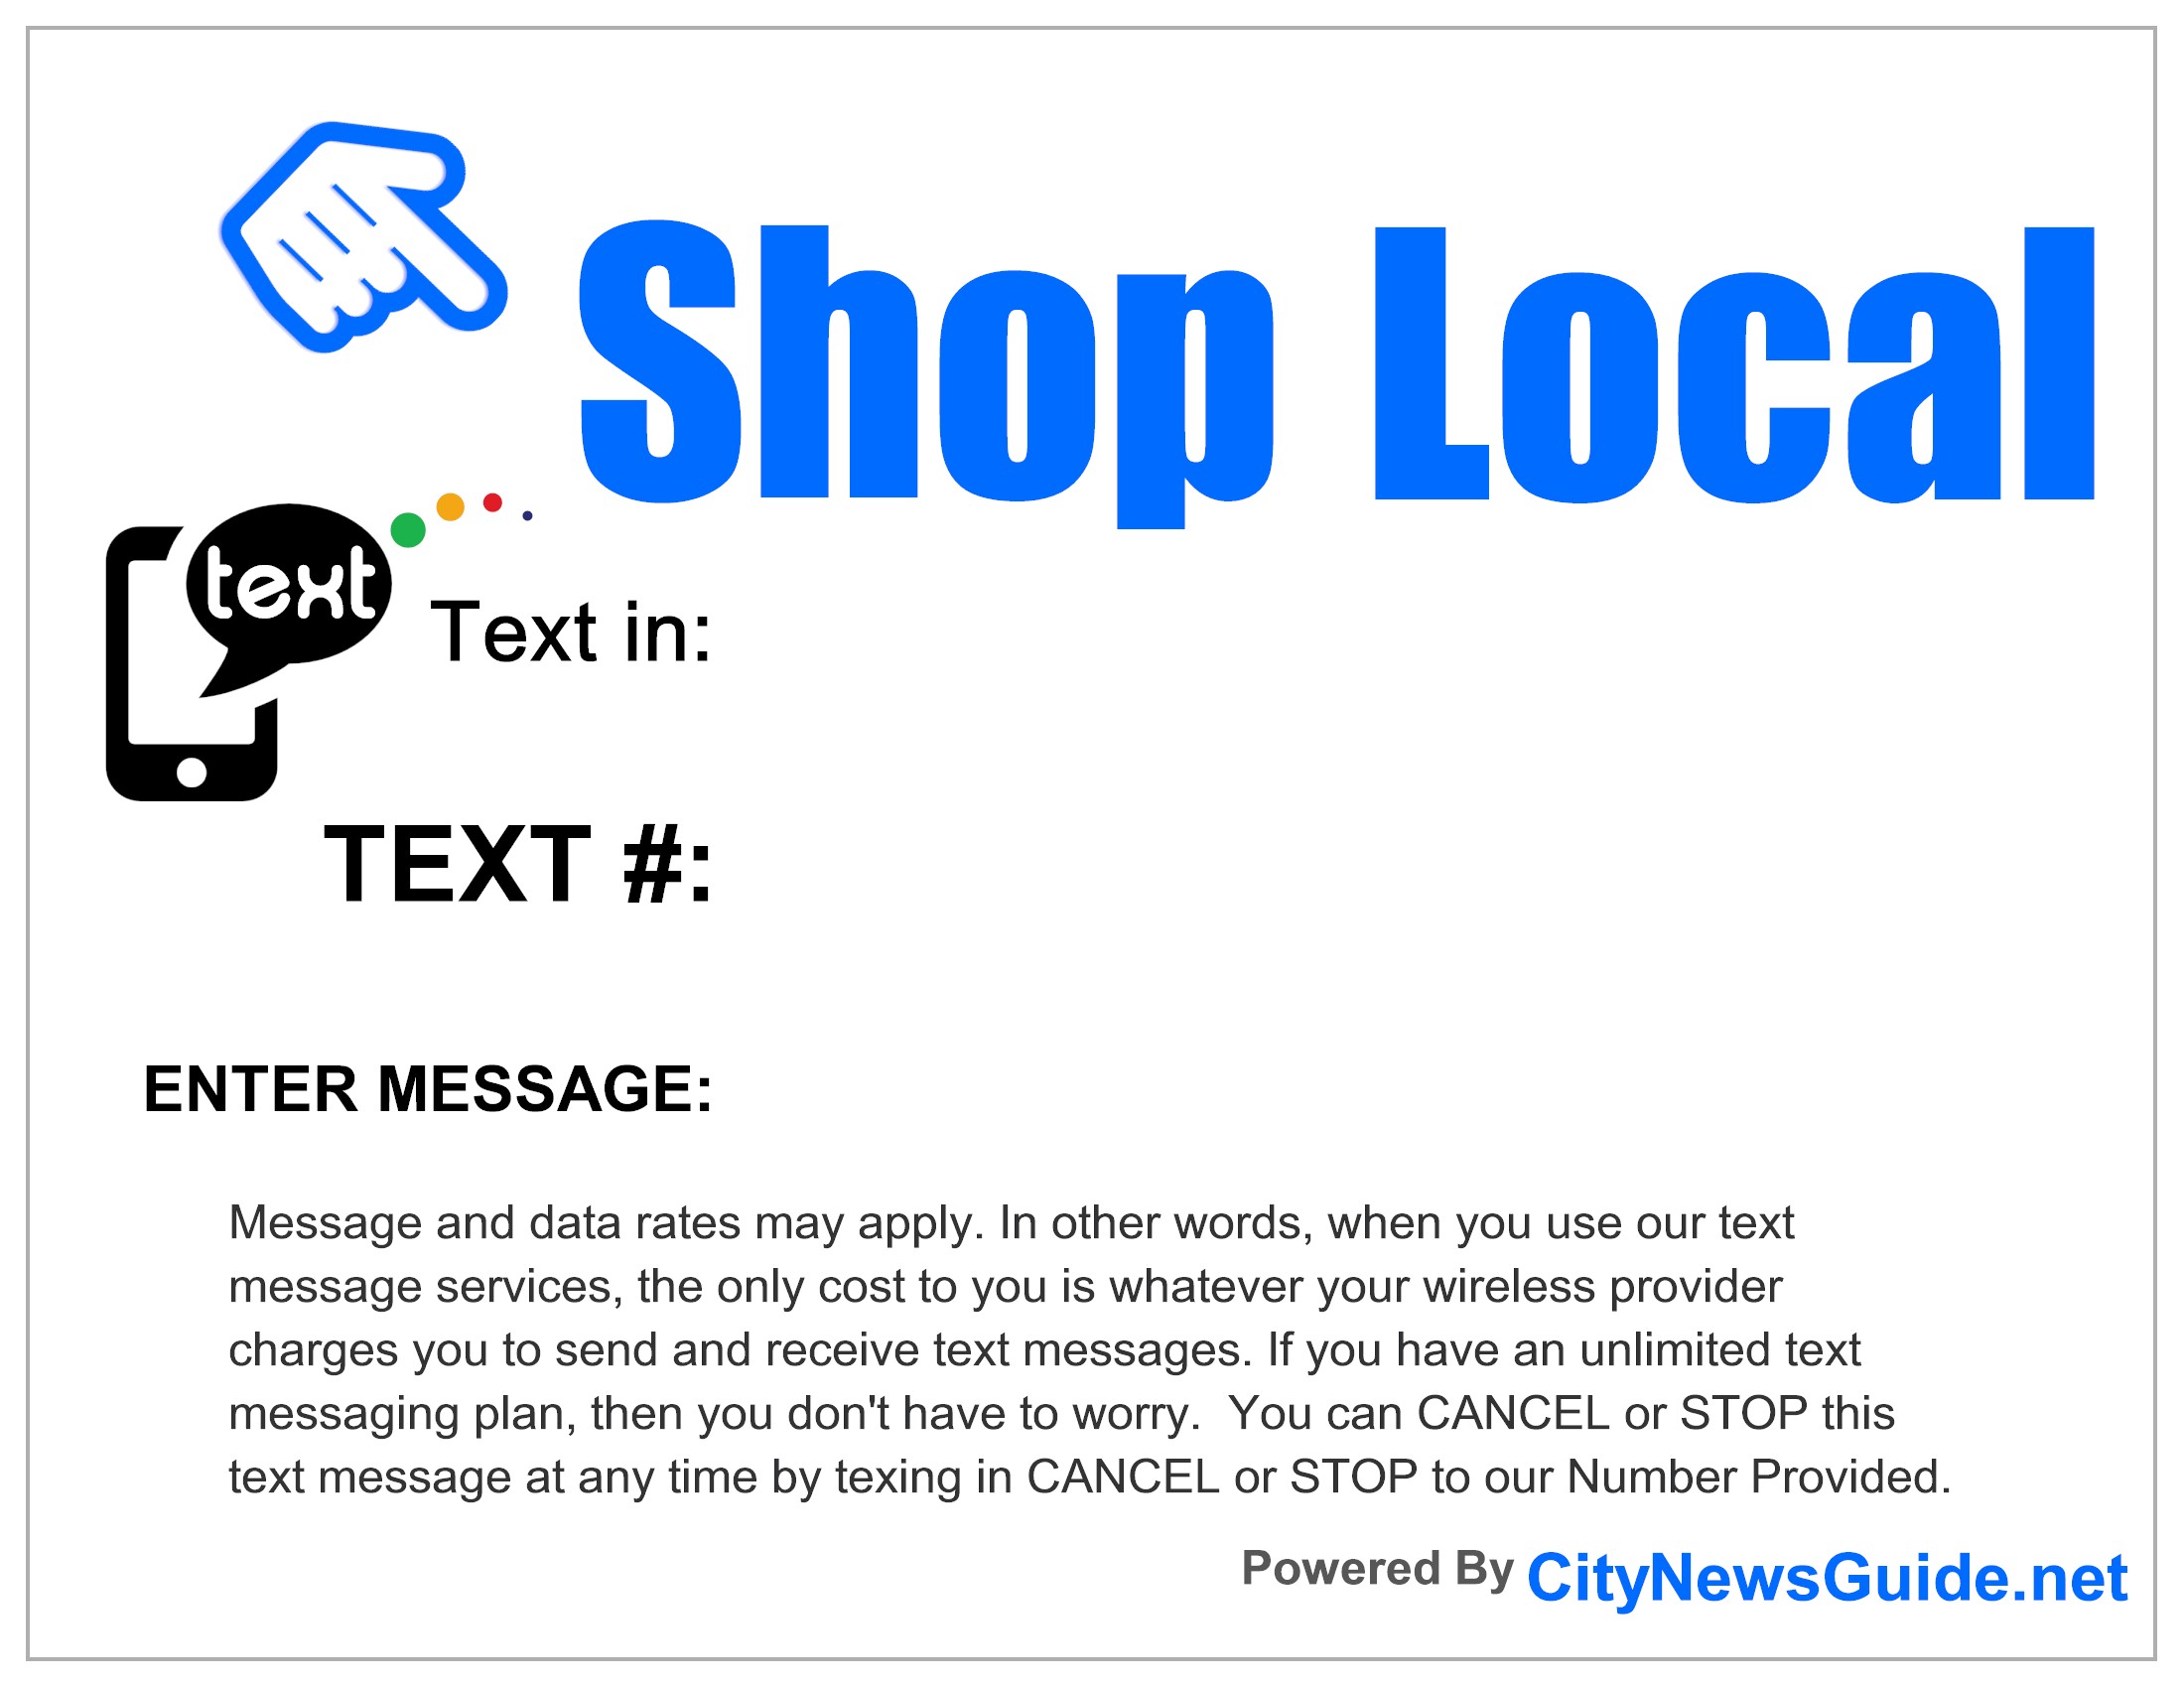 Proudly Display - Shop Local - Text Marketing - CityNewsGuide.net